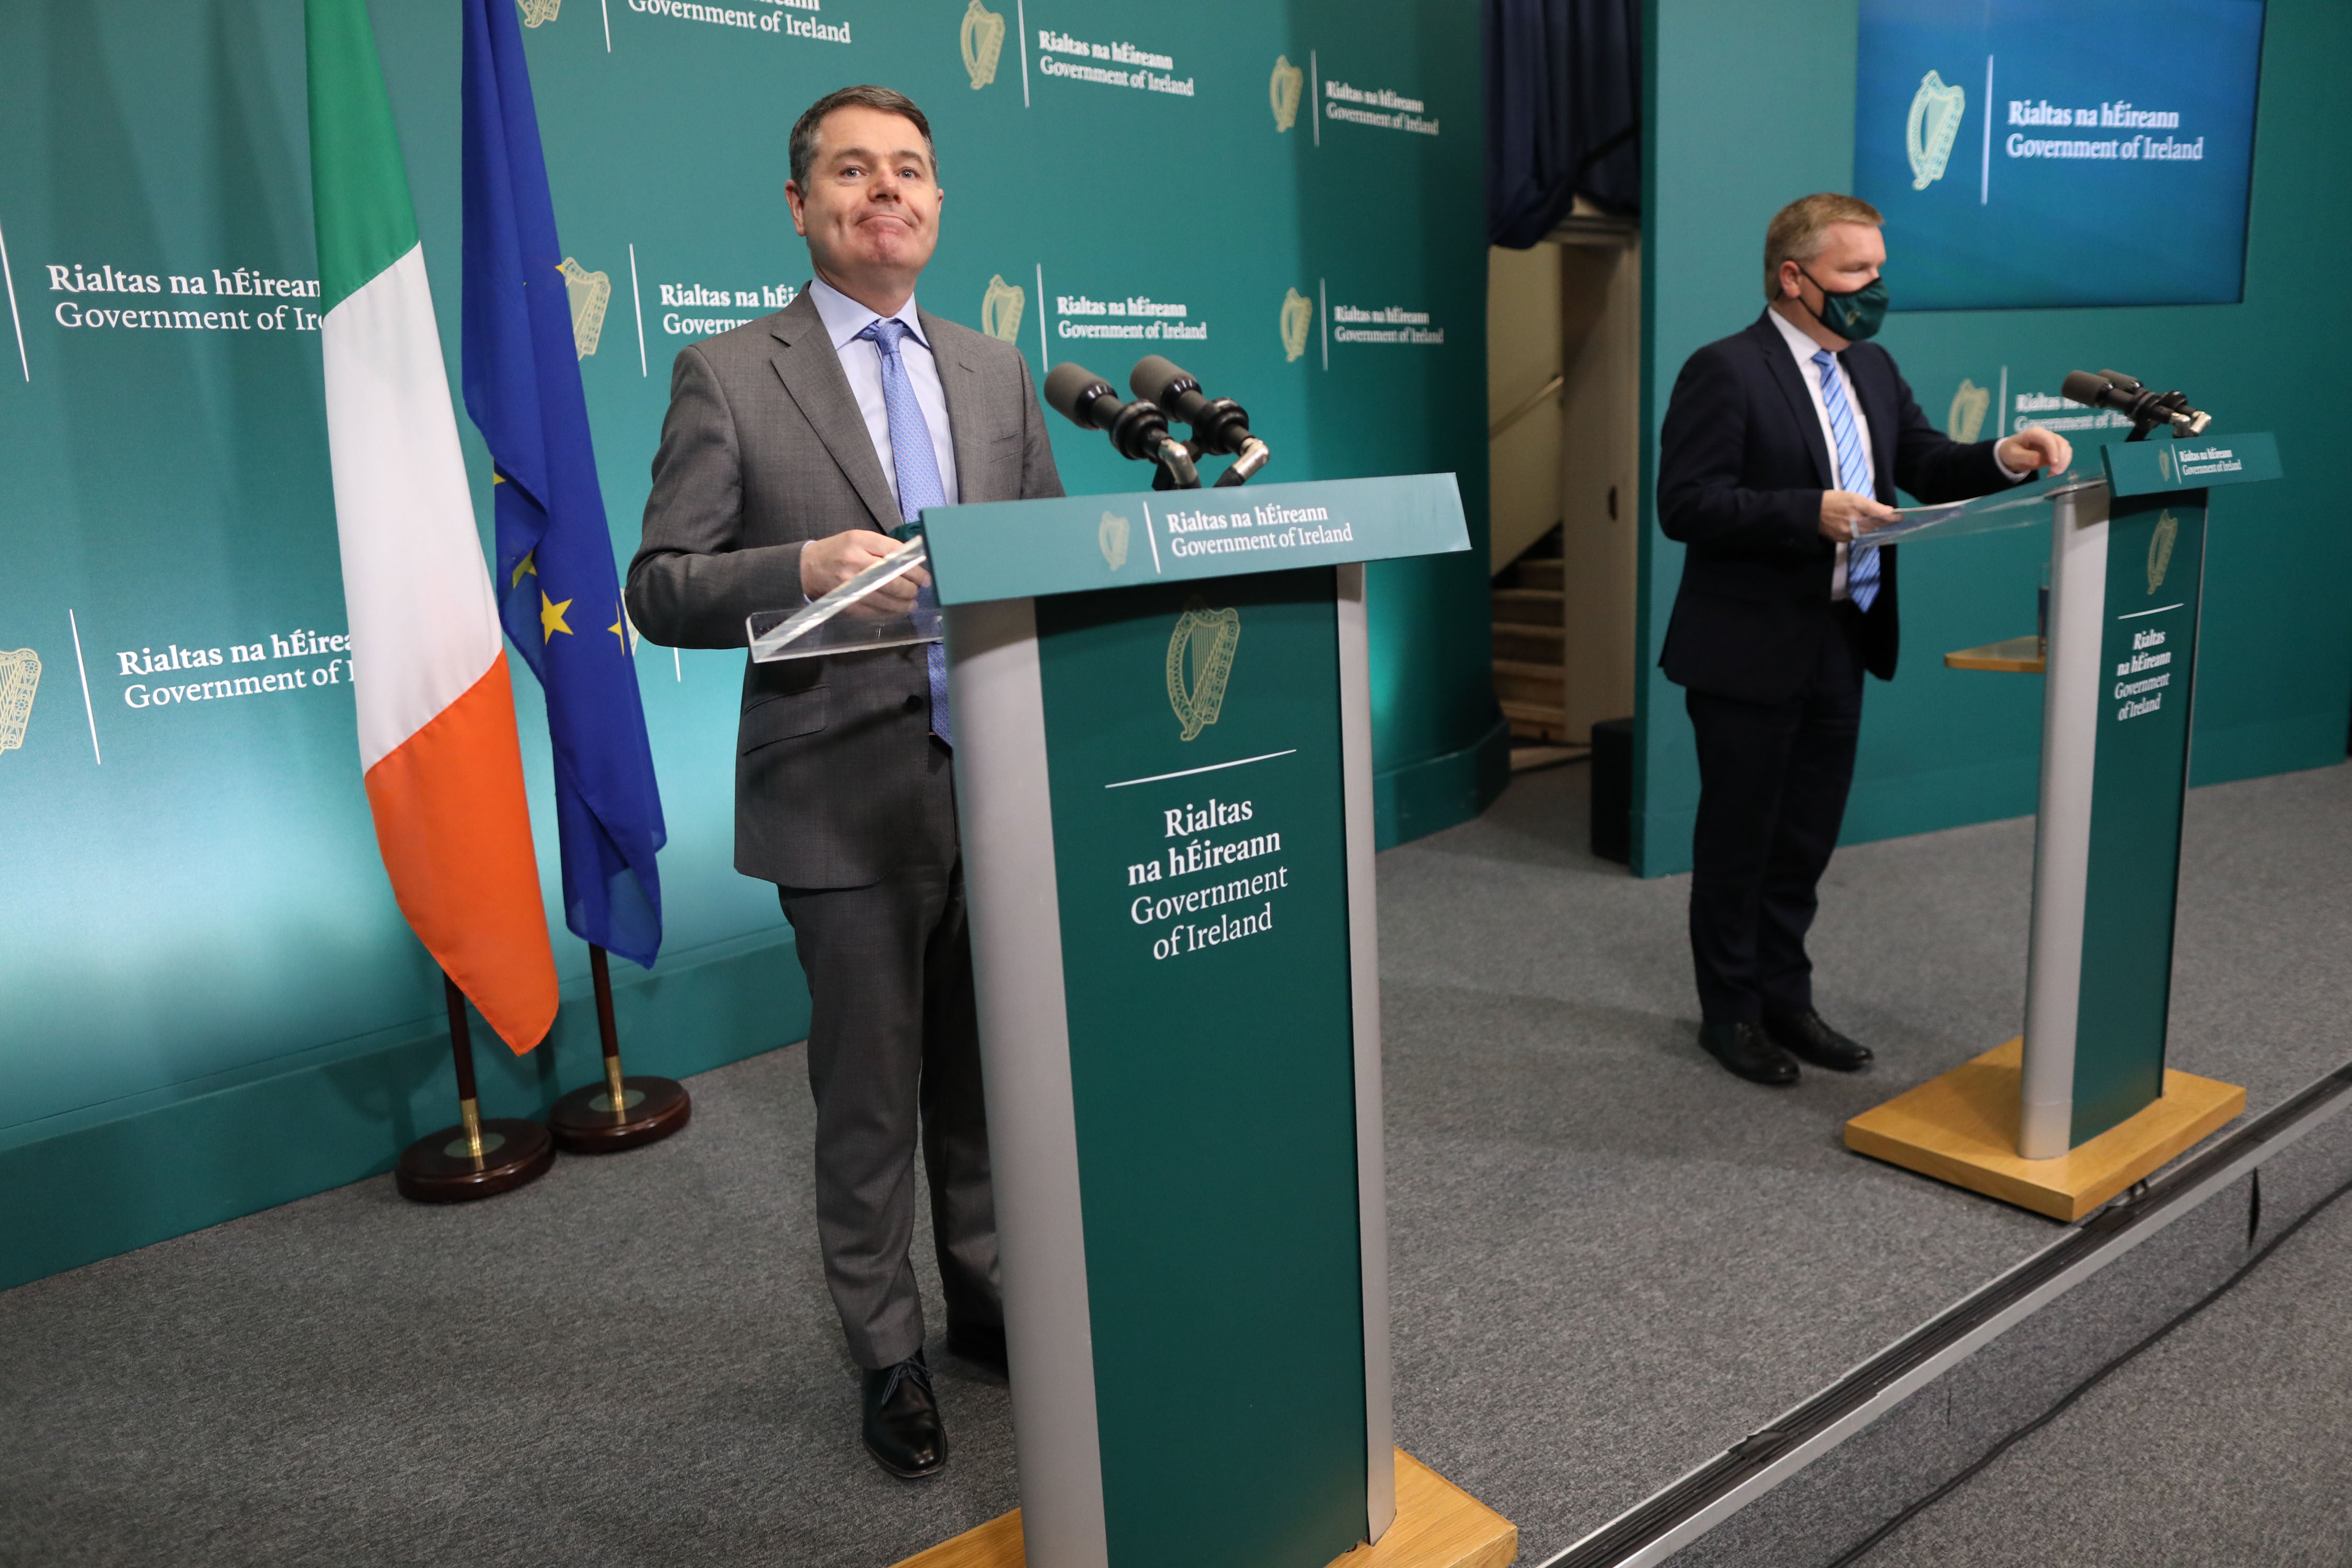 Minister for Finance Paschal Donohoe, left, and Michael McGrath, the Minister for Public Expenditure and Reform (Julien Behal Photography/PA)